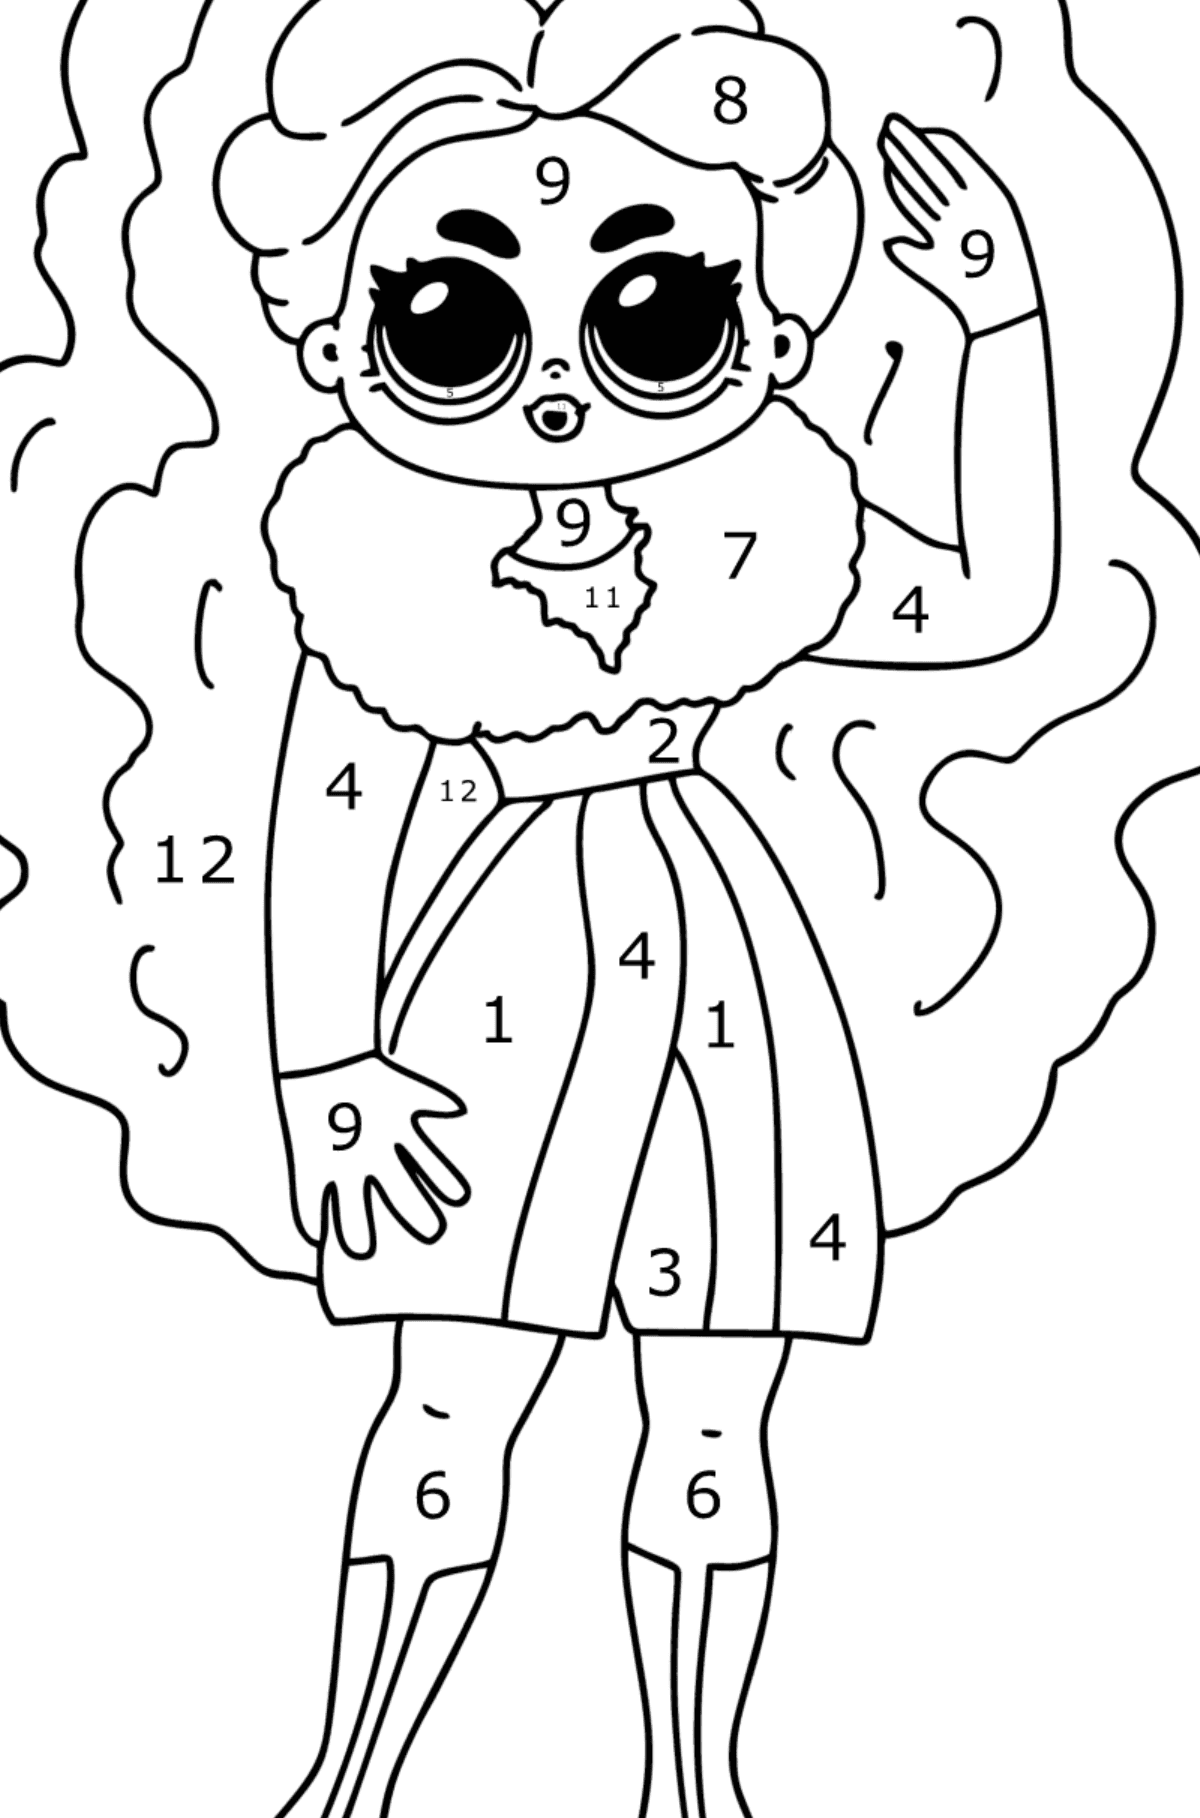 Coloring page LOL OMG Cute Girl - Coloring by Numbers for Kids